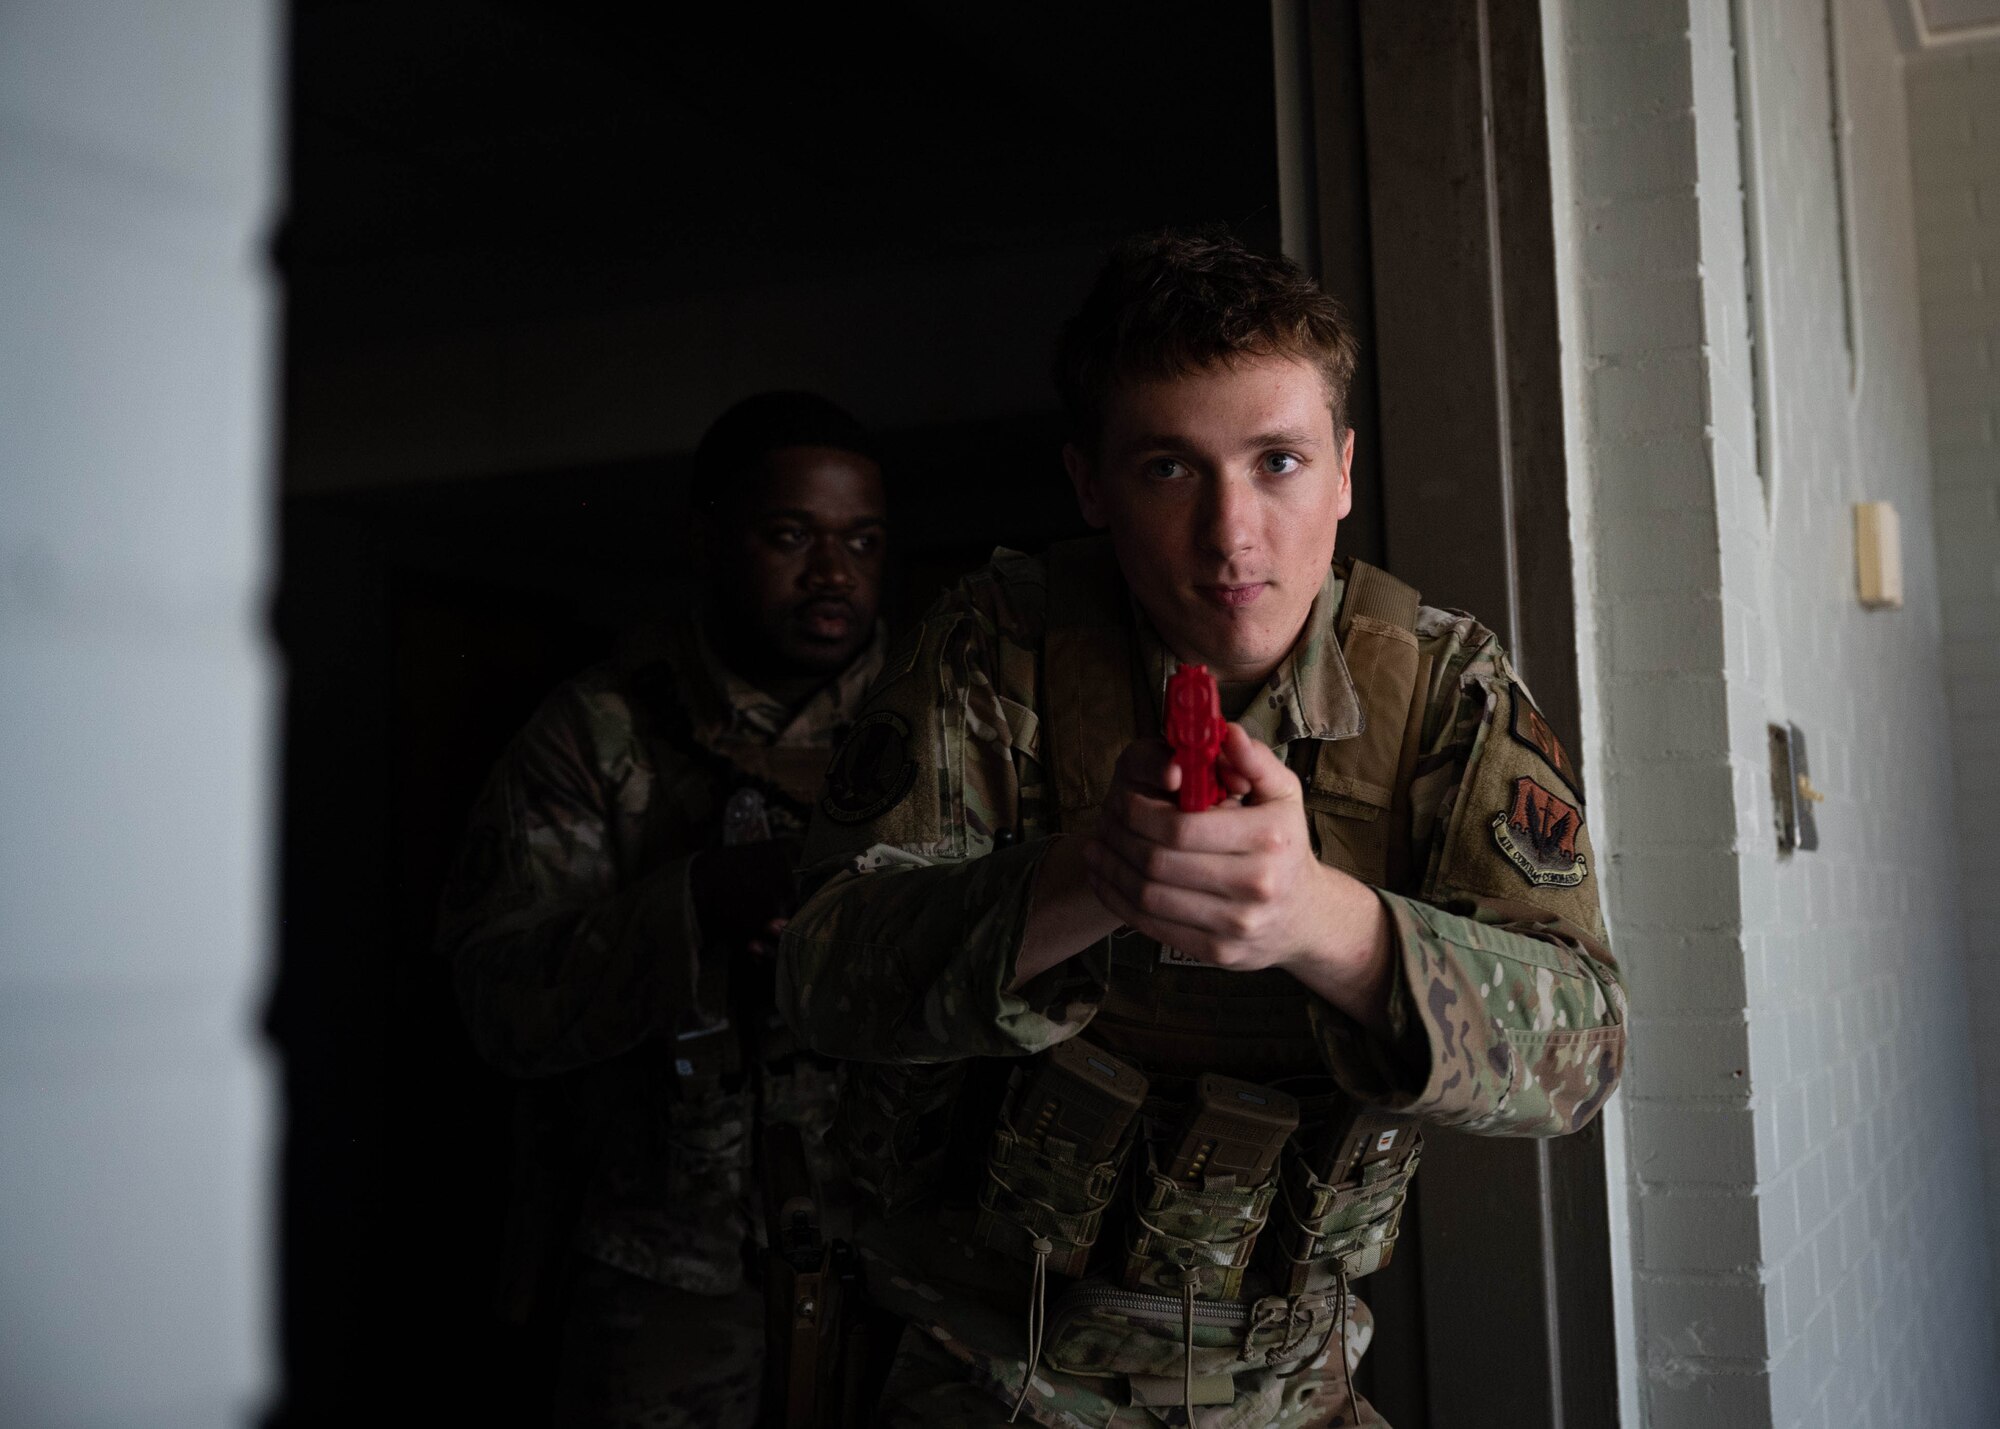 Airman with a mock pistol comes around a corner in close quarters